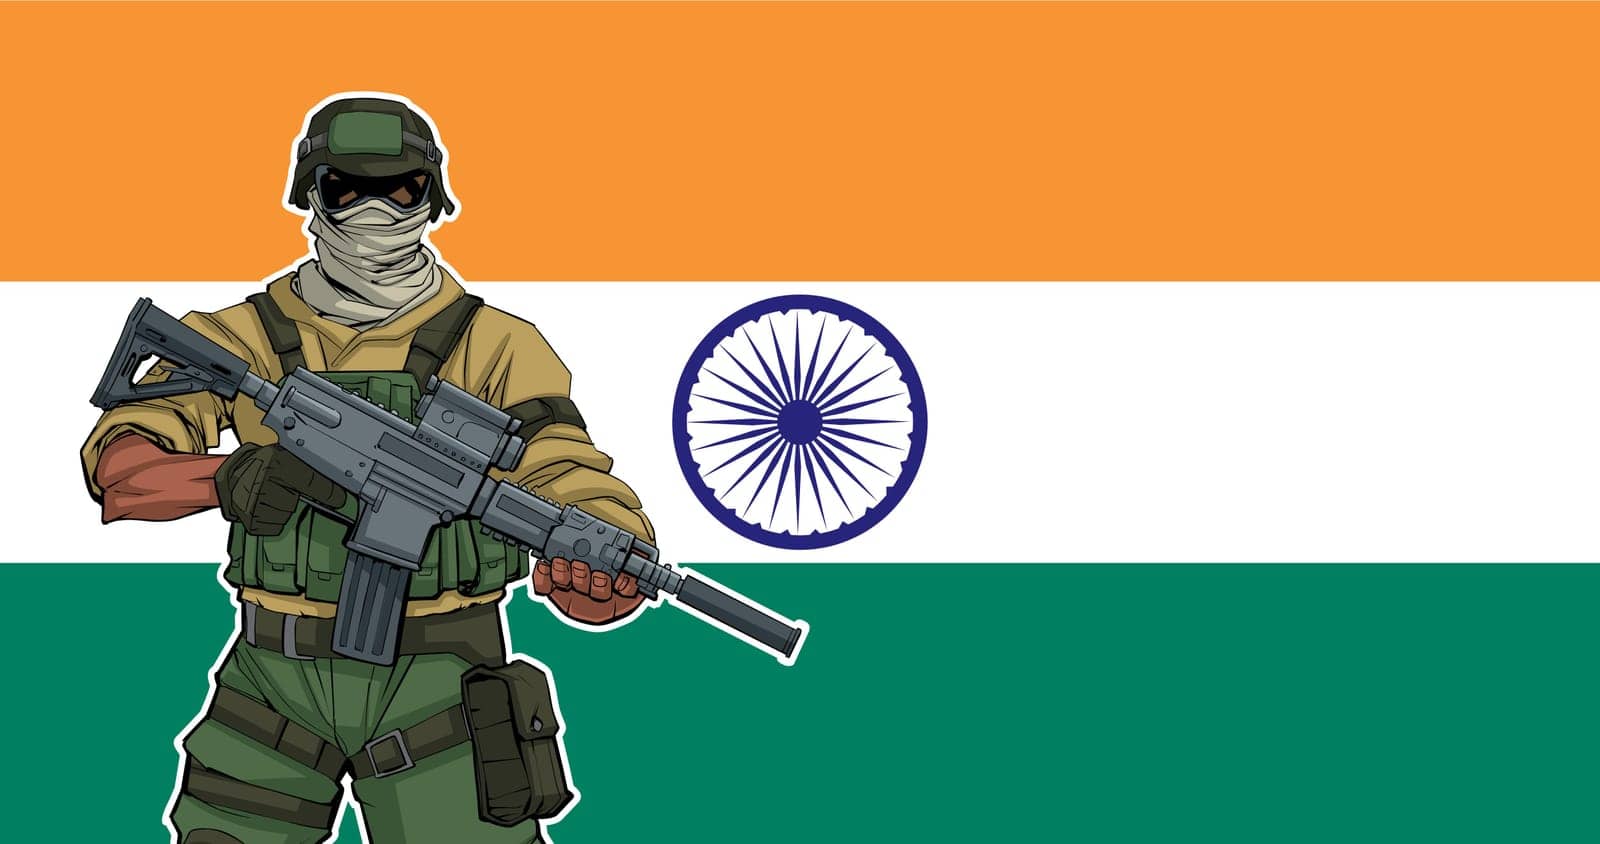 Illustration of Indian soldier with the flag of India in the background.  